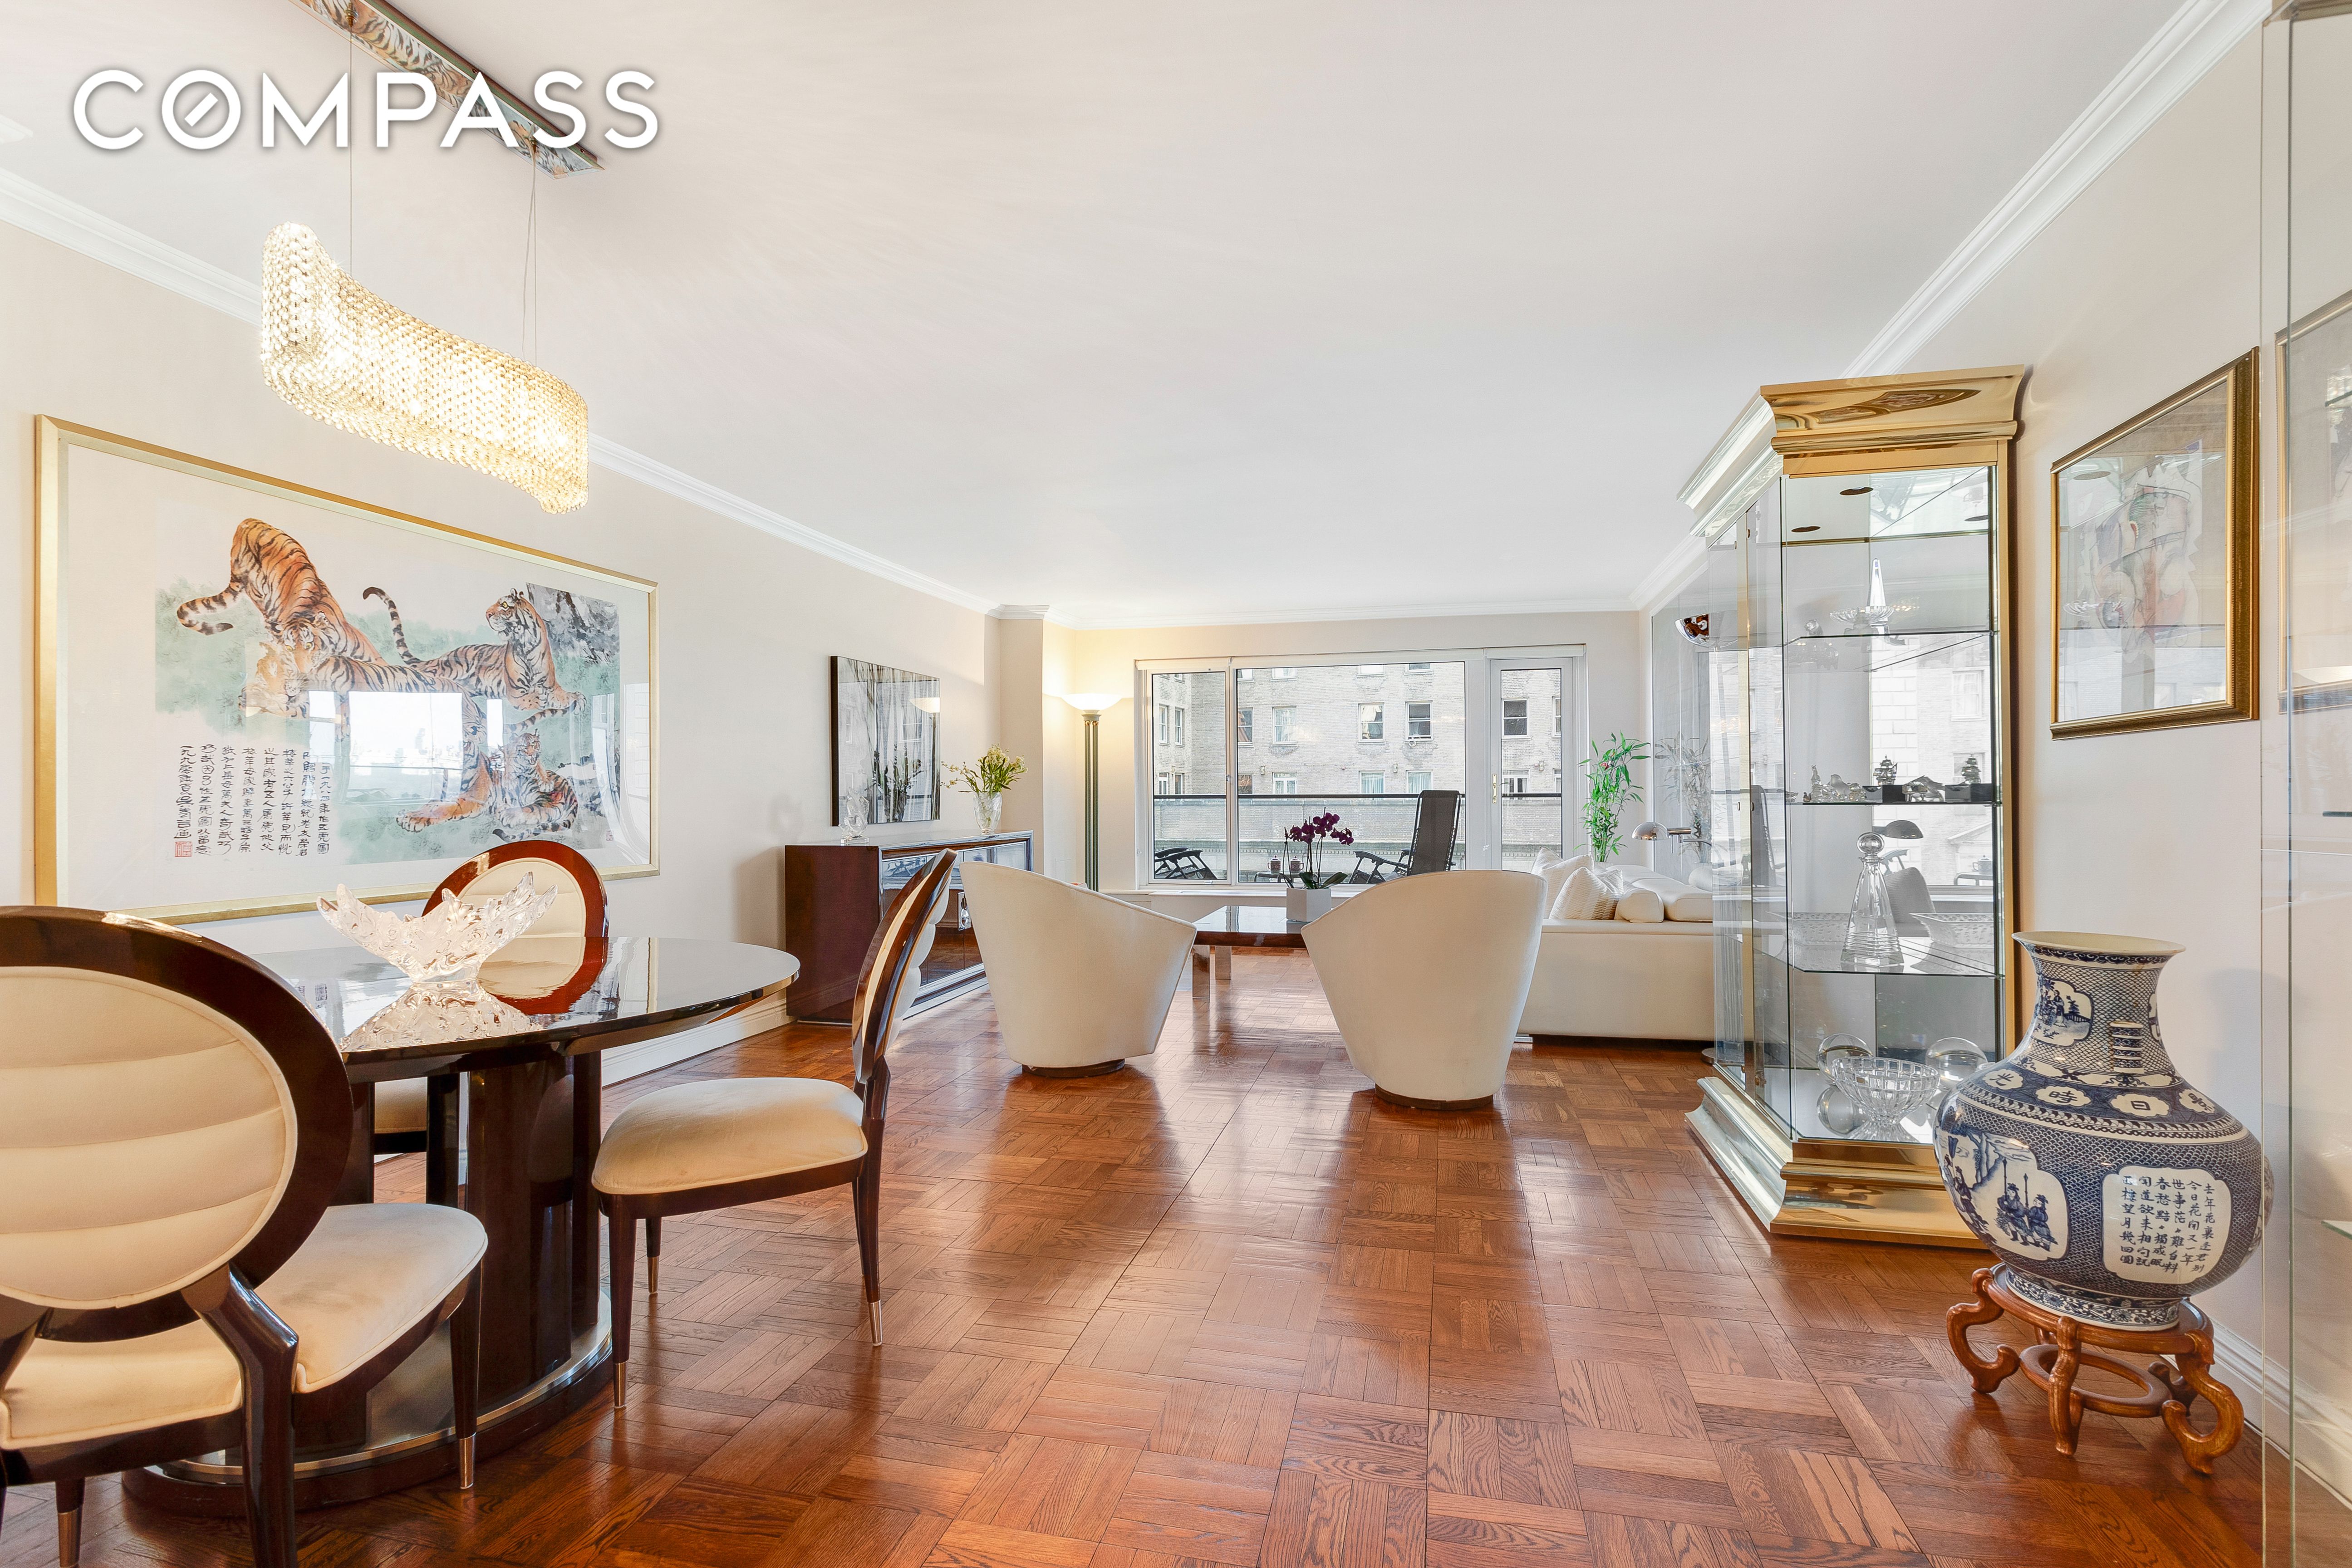 200 Central Park 20G, Central Park South, Midtown West, NYC - 2 Bedrooms  
2 Bathrooms  
4 Rooms - 